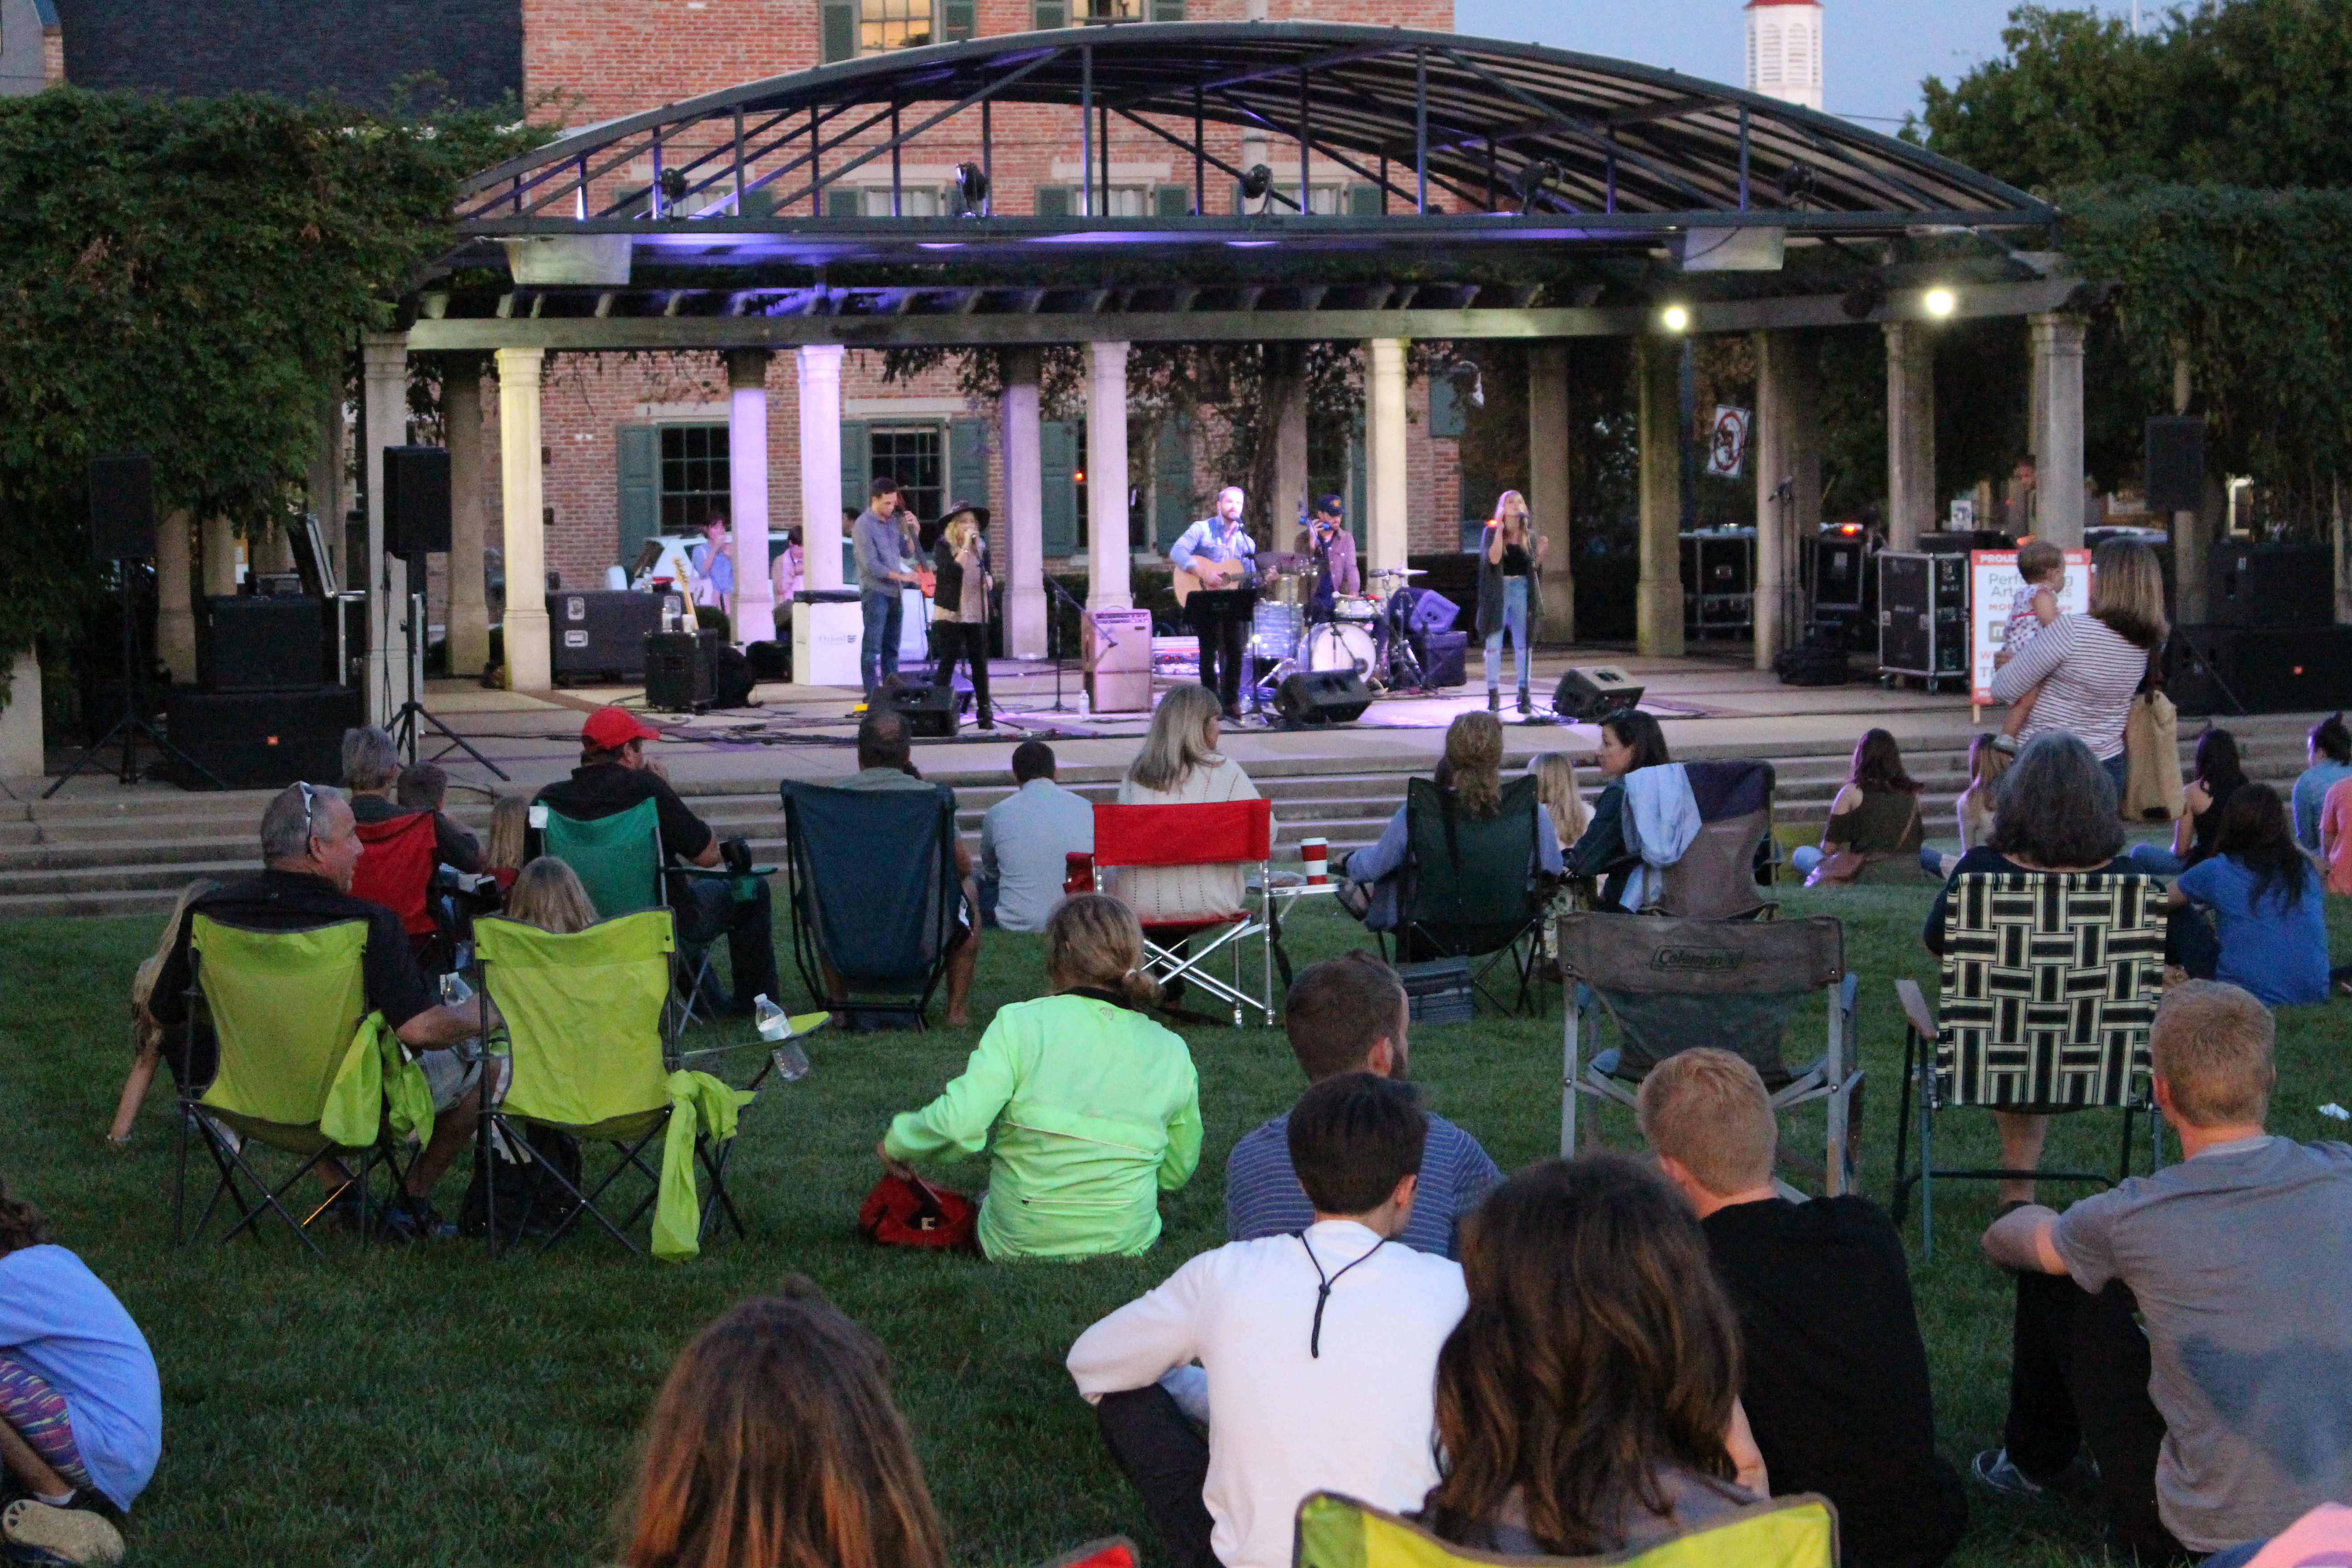 The Bundys performing at Uptown Park with audience in sitting in chairs on the lawn